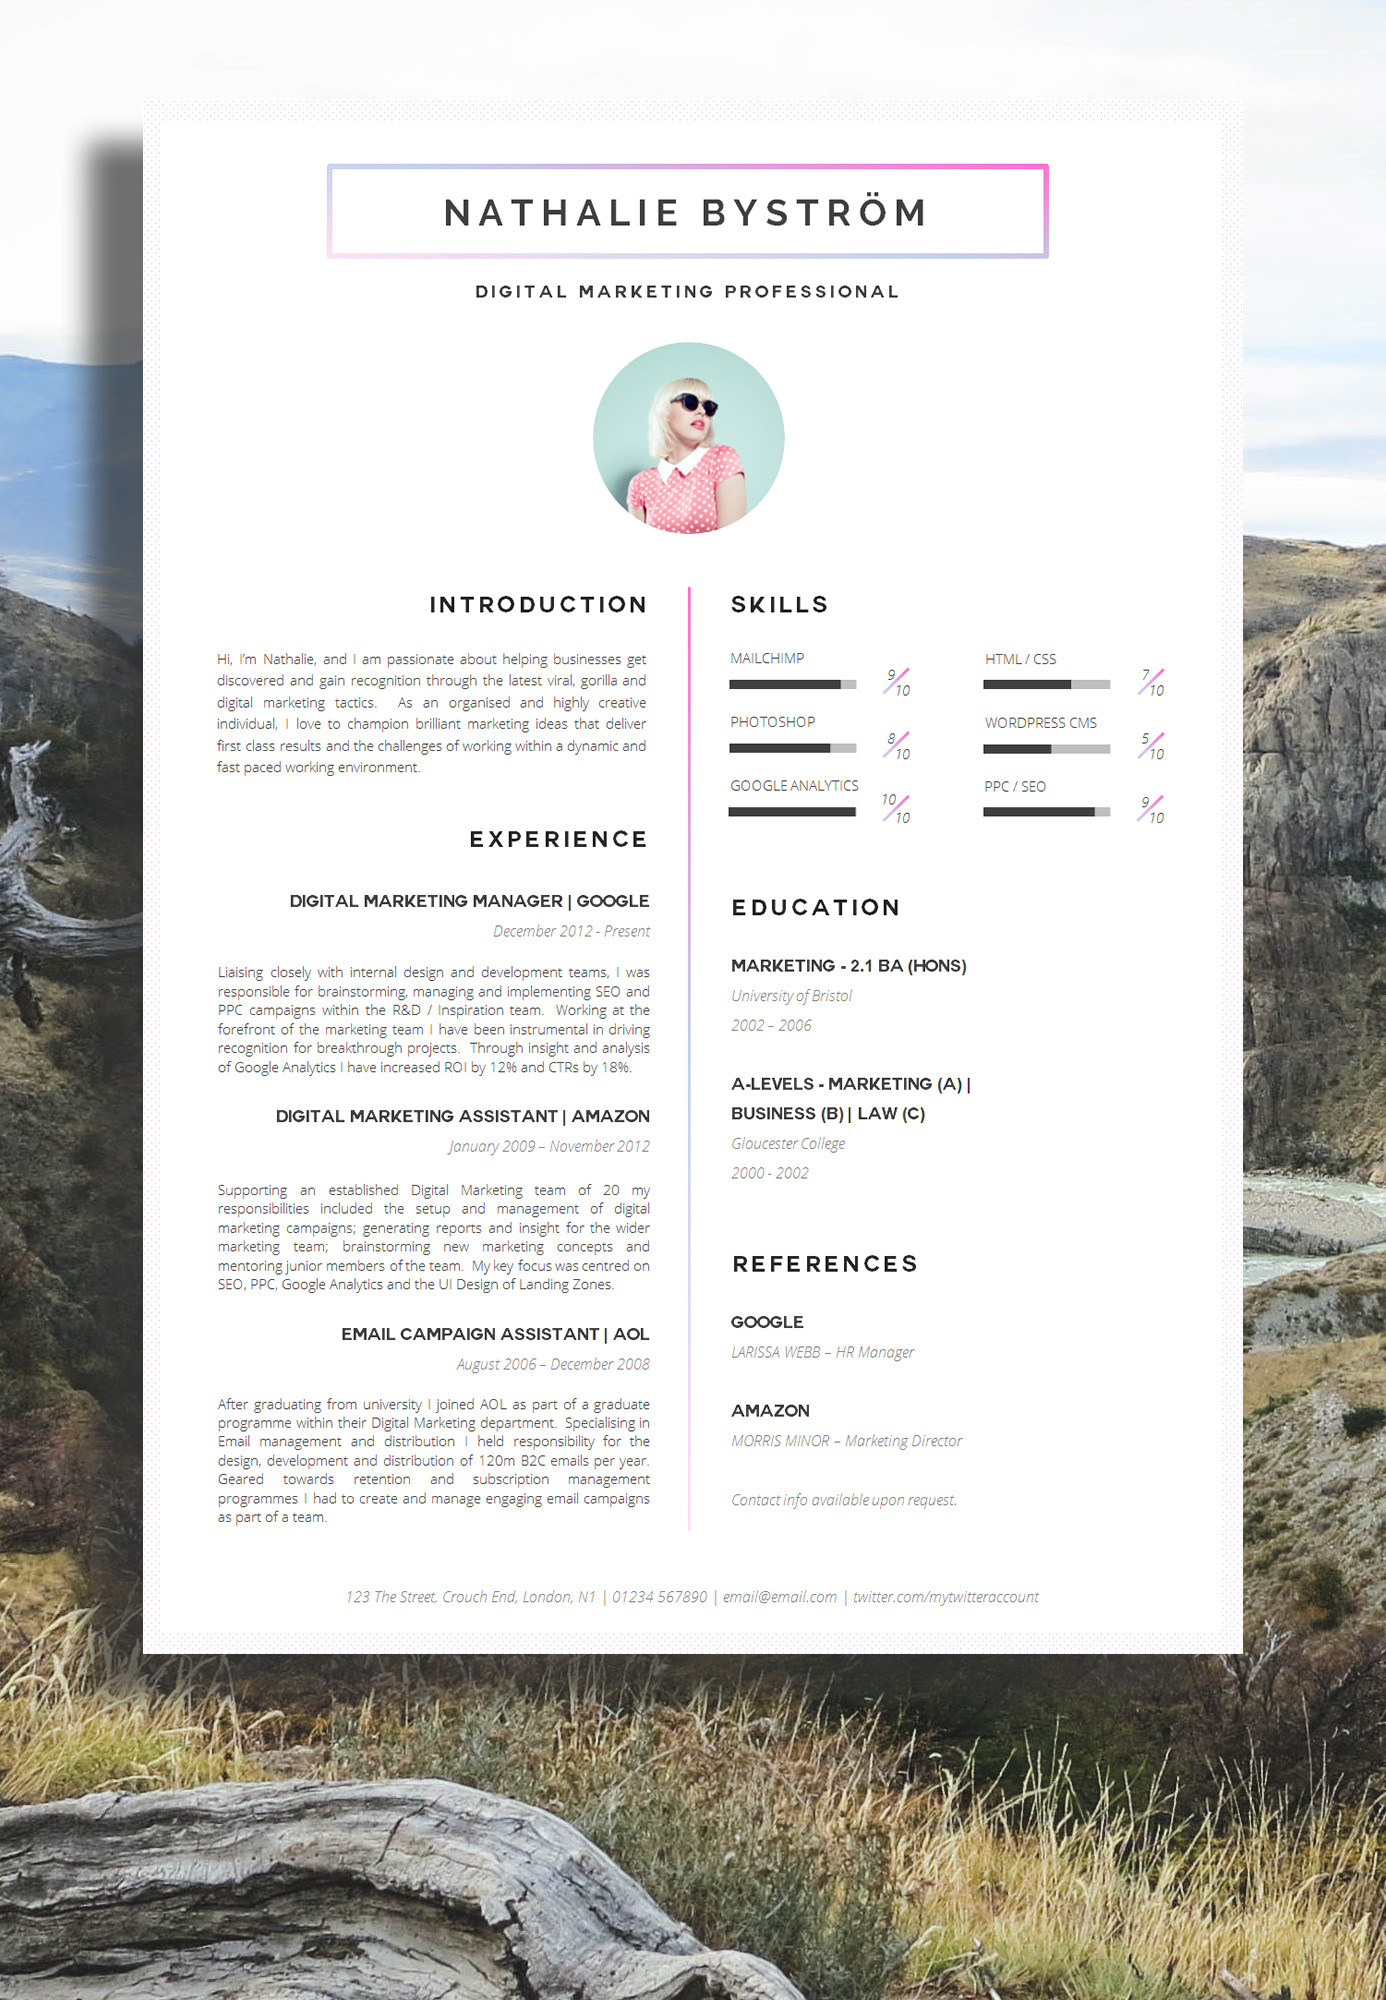 Sample Of About Me In Resume 20 Creative Resume Examples for Your Inspiration Skillroads.com …